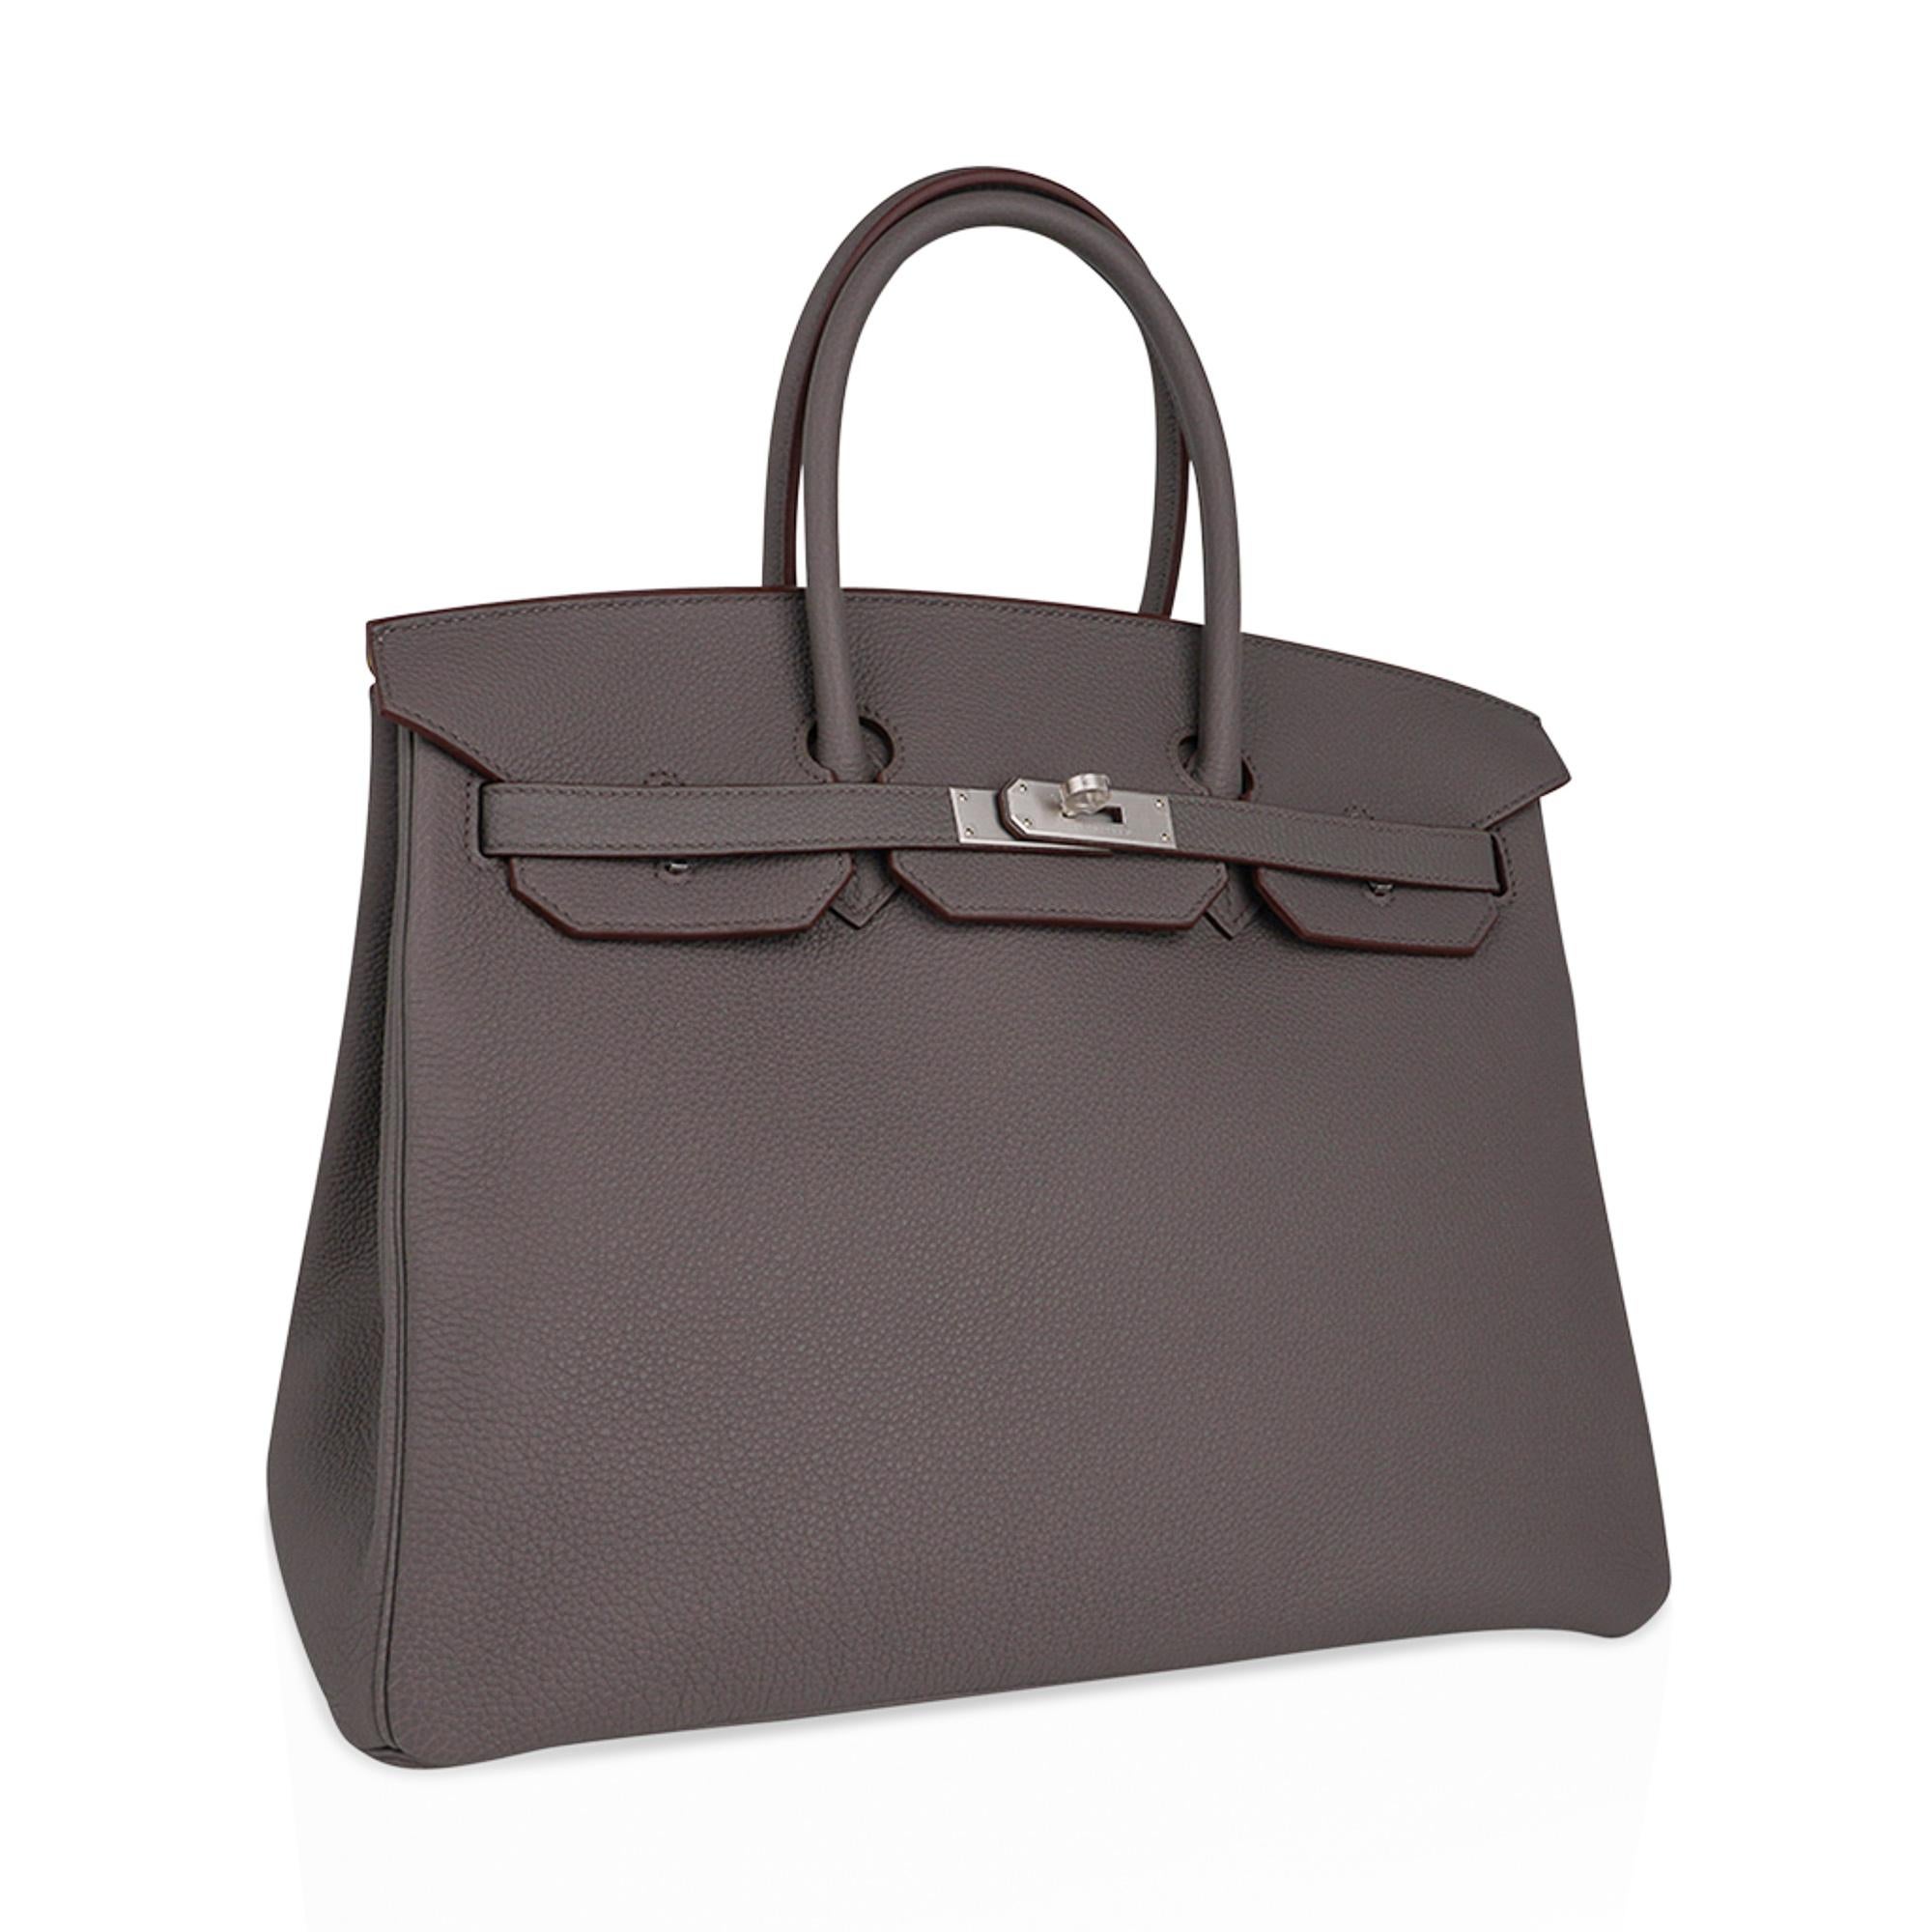 Mightychic offers a rare Hermes Birkin HSS 35 bag featured in Etain with Lime interior. 
Etain is the most perfect medium gray and is utterly neutral.
Subtle brushed palladium hardware.
Togo leather  is textured and scratch resistant.
This beautiful